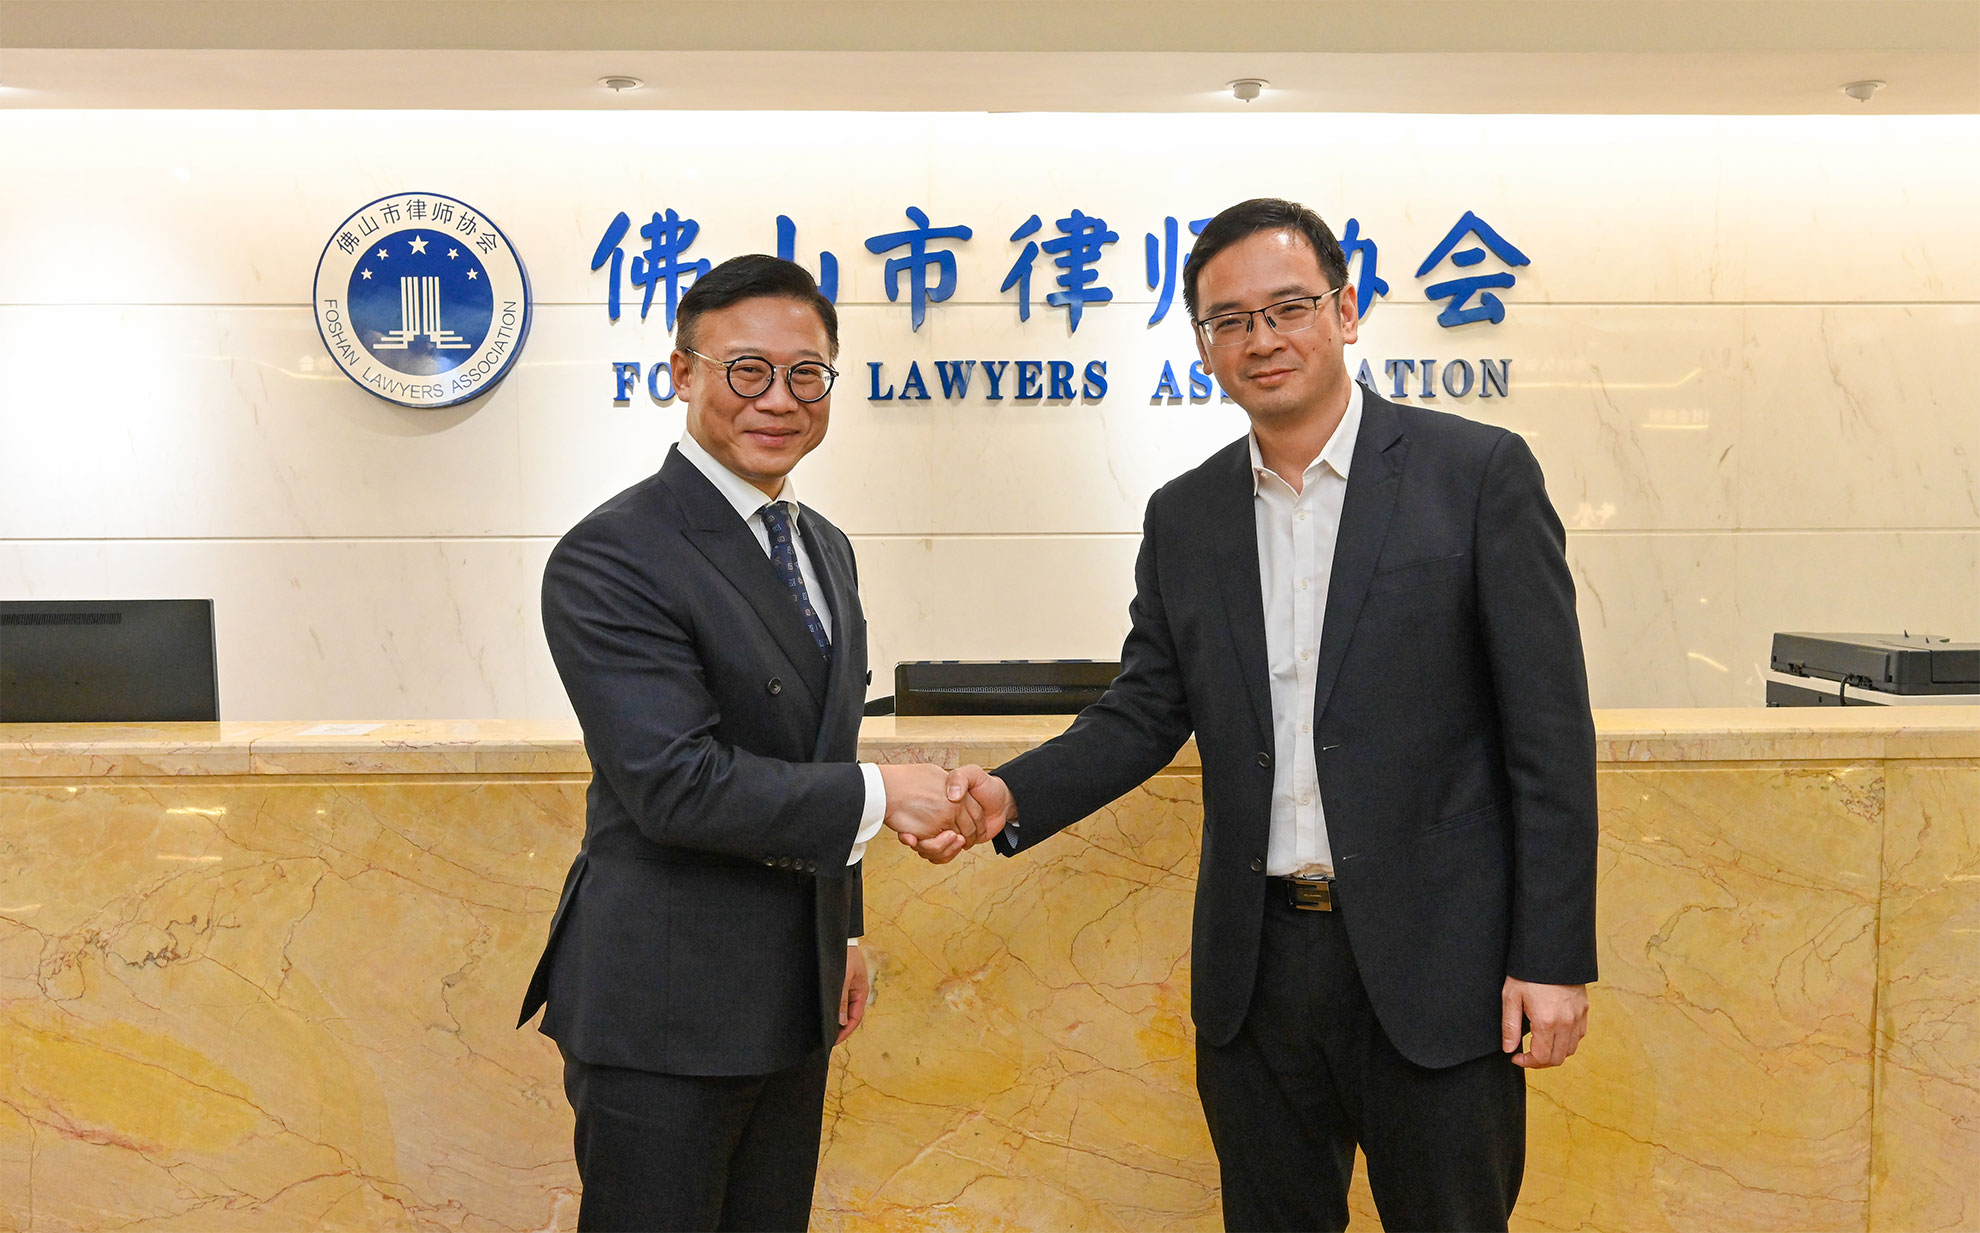 The Deputy Secretary for Justice, Mr Cheung Kwok-kwan and a delegation of young lawyers led by him today (November 18) called on the Foshan Lawyers Association. Photo shows Mr Cheung (left) and the Chief of Justice Bureau of Foshan Municipality, General Secretary of the Communist Party of the Justice Bureau, Mr Liu Zuhui (right).